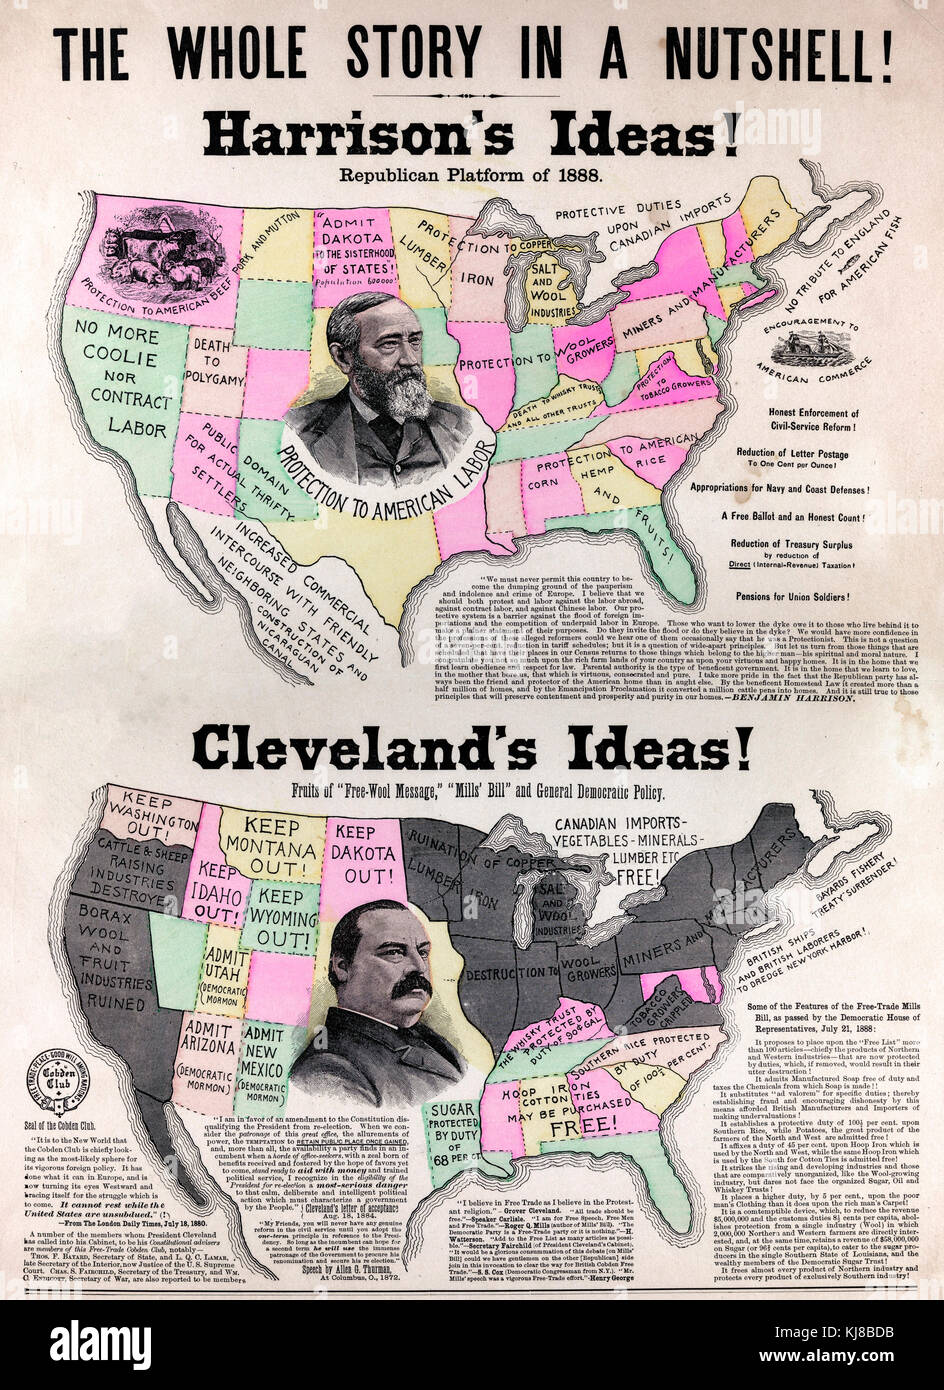 The Whole Story in a Nutshell! Harrison's Ideas! Cleveland's Ideas!Grover Cleveland - Benjamin Harrison presidential (1888) campaign poster about the trade policy of the two candidates. The map supports the work of the Harrison campaign. Stock Photo